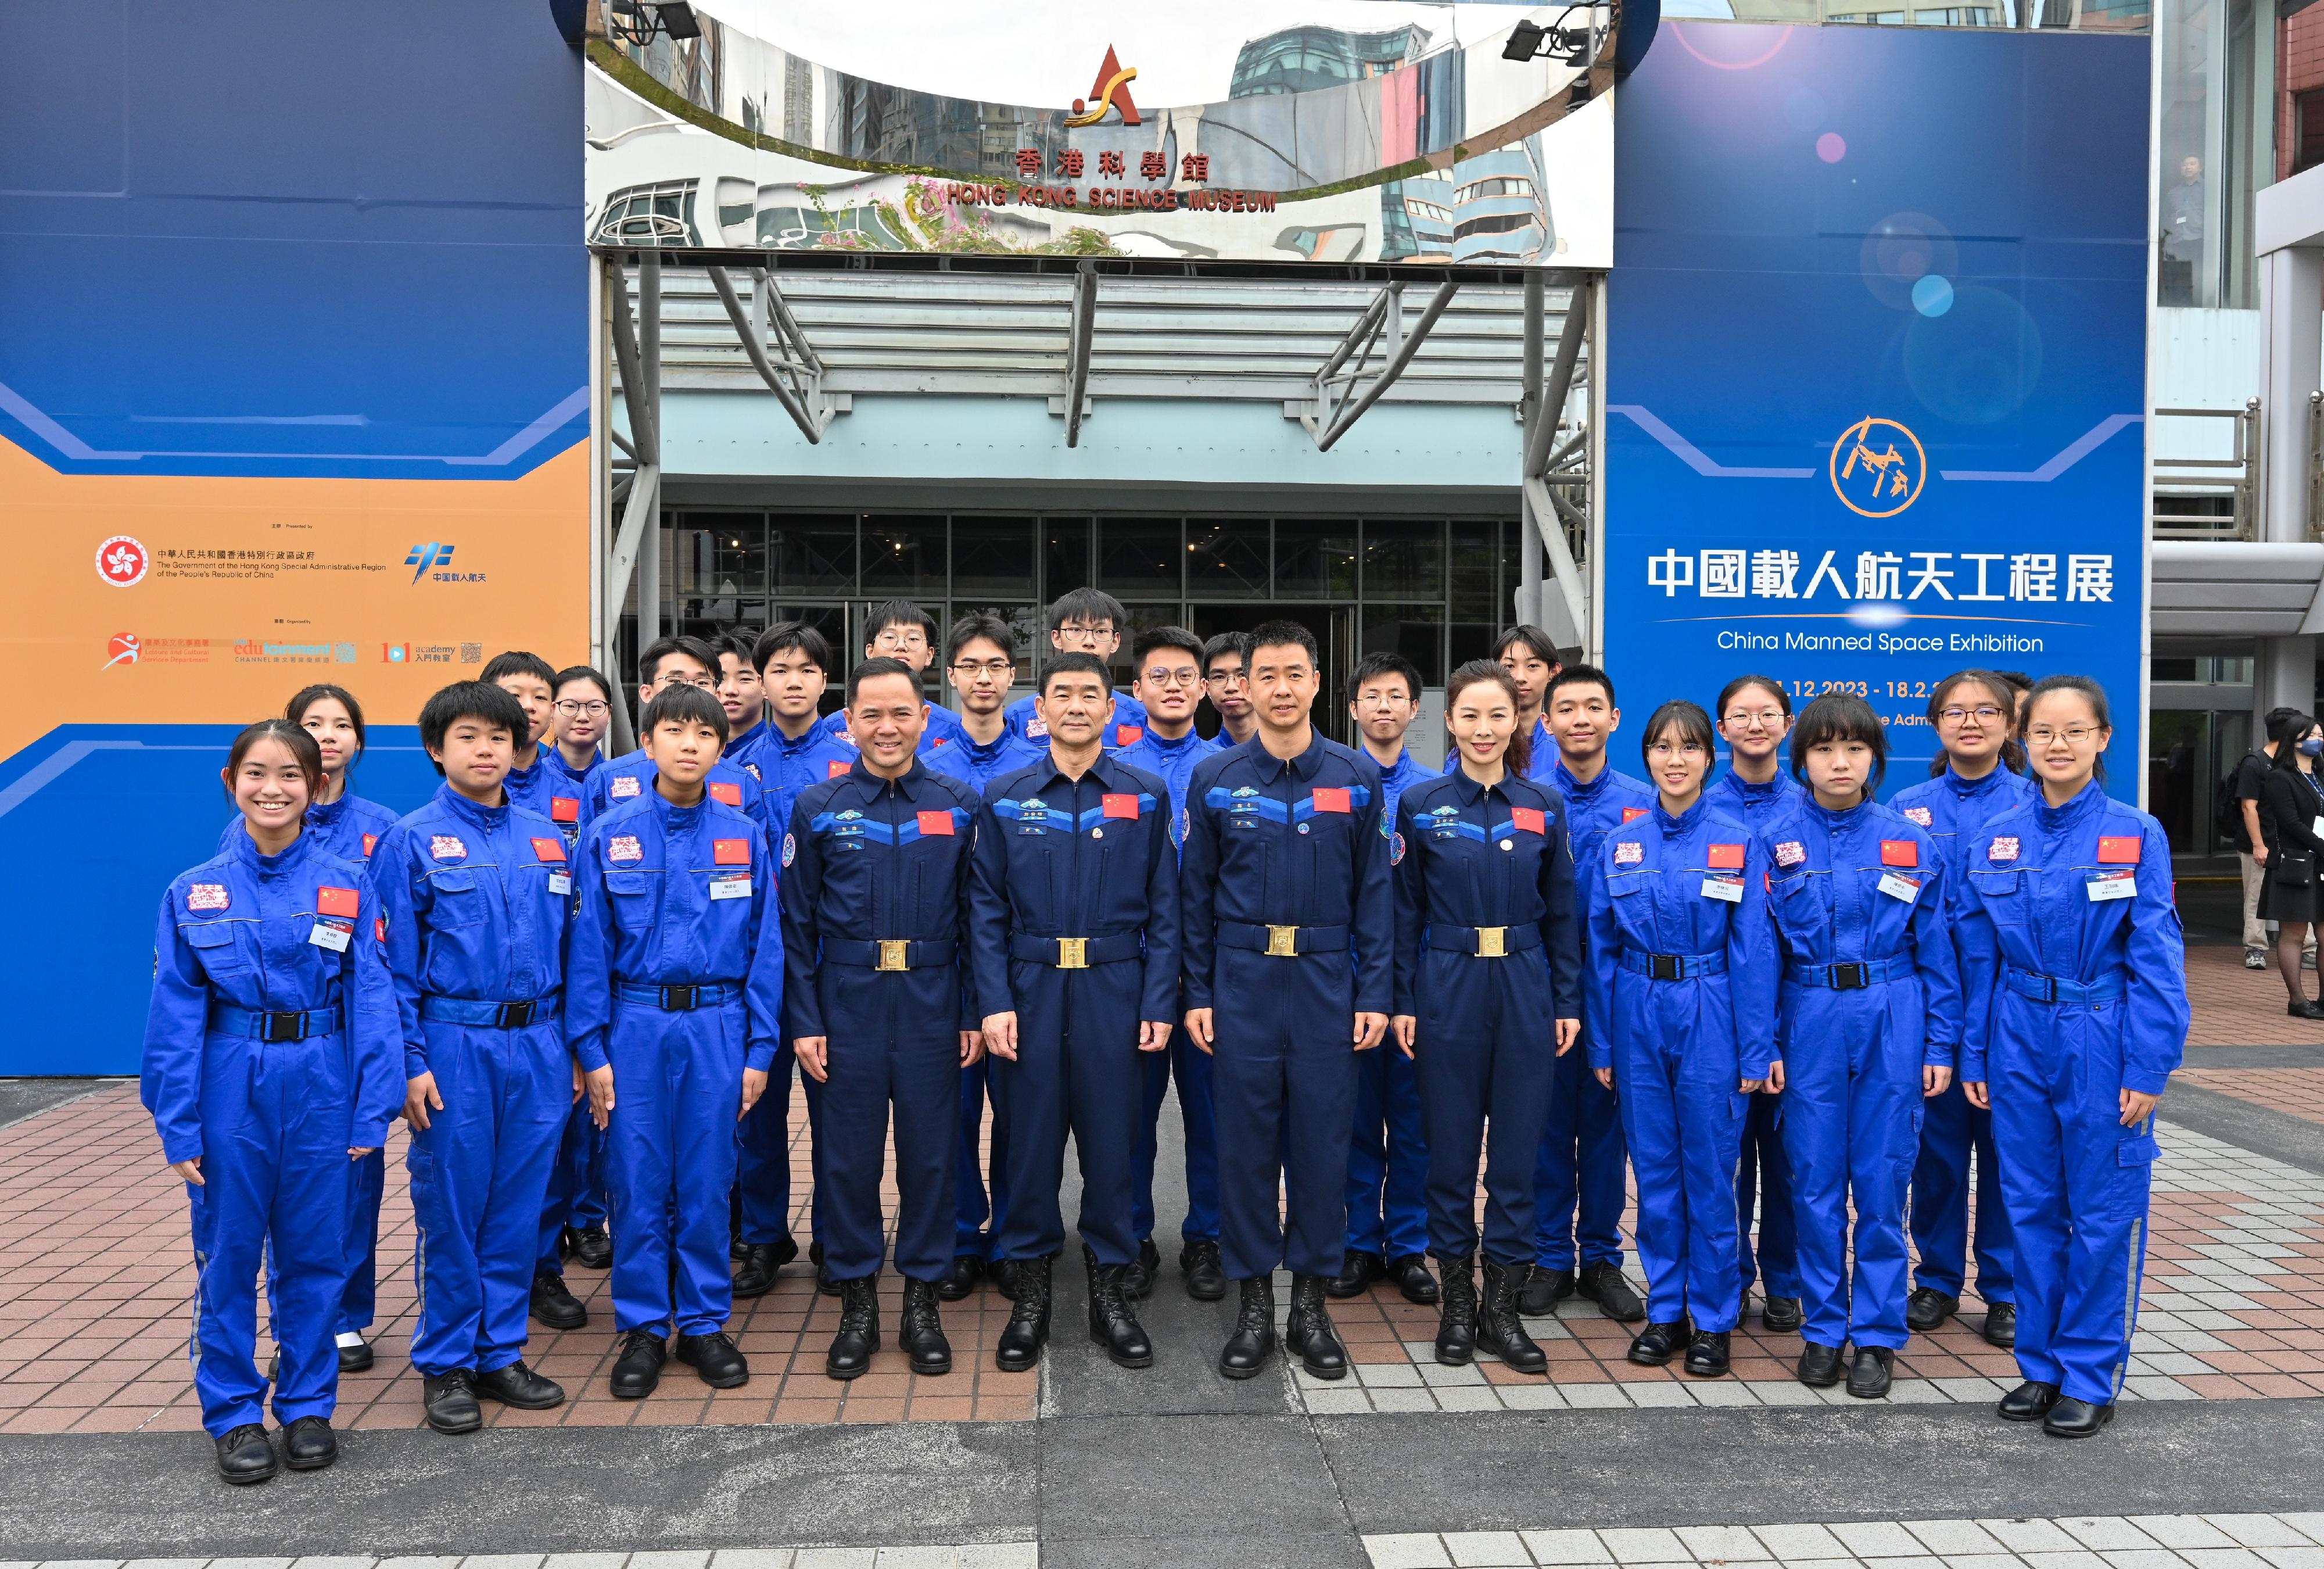 The China Manned Space delegation continued their visit to Hong Kong today (November 30). Photo shows (from front row, fourth left) Shenzhou-15 astronaut Mr Zhang Lu, Shenzhou-12 astronaut Mr Liu Boming, Shenzhou-14 mission commander Mr Chen Dong, Shenzhou-13 astronaut Ms Wang Yaping, and young astronauts.